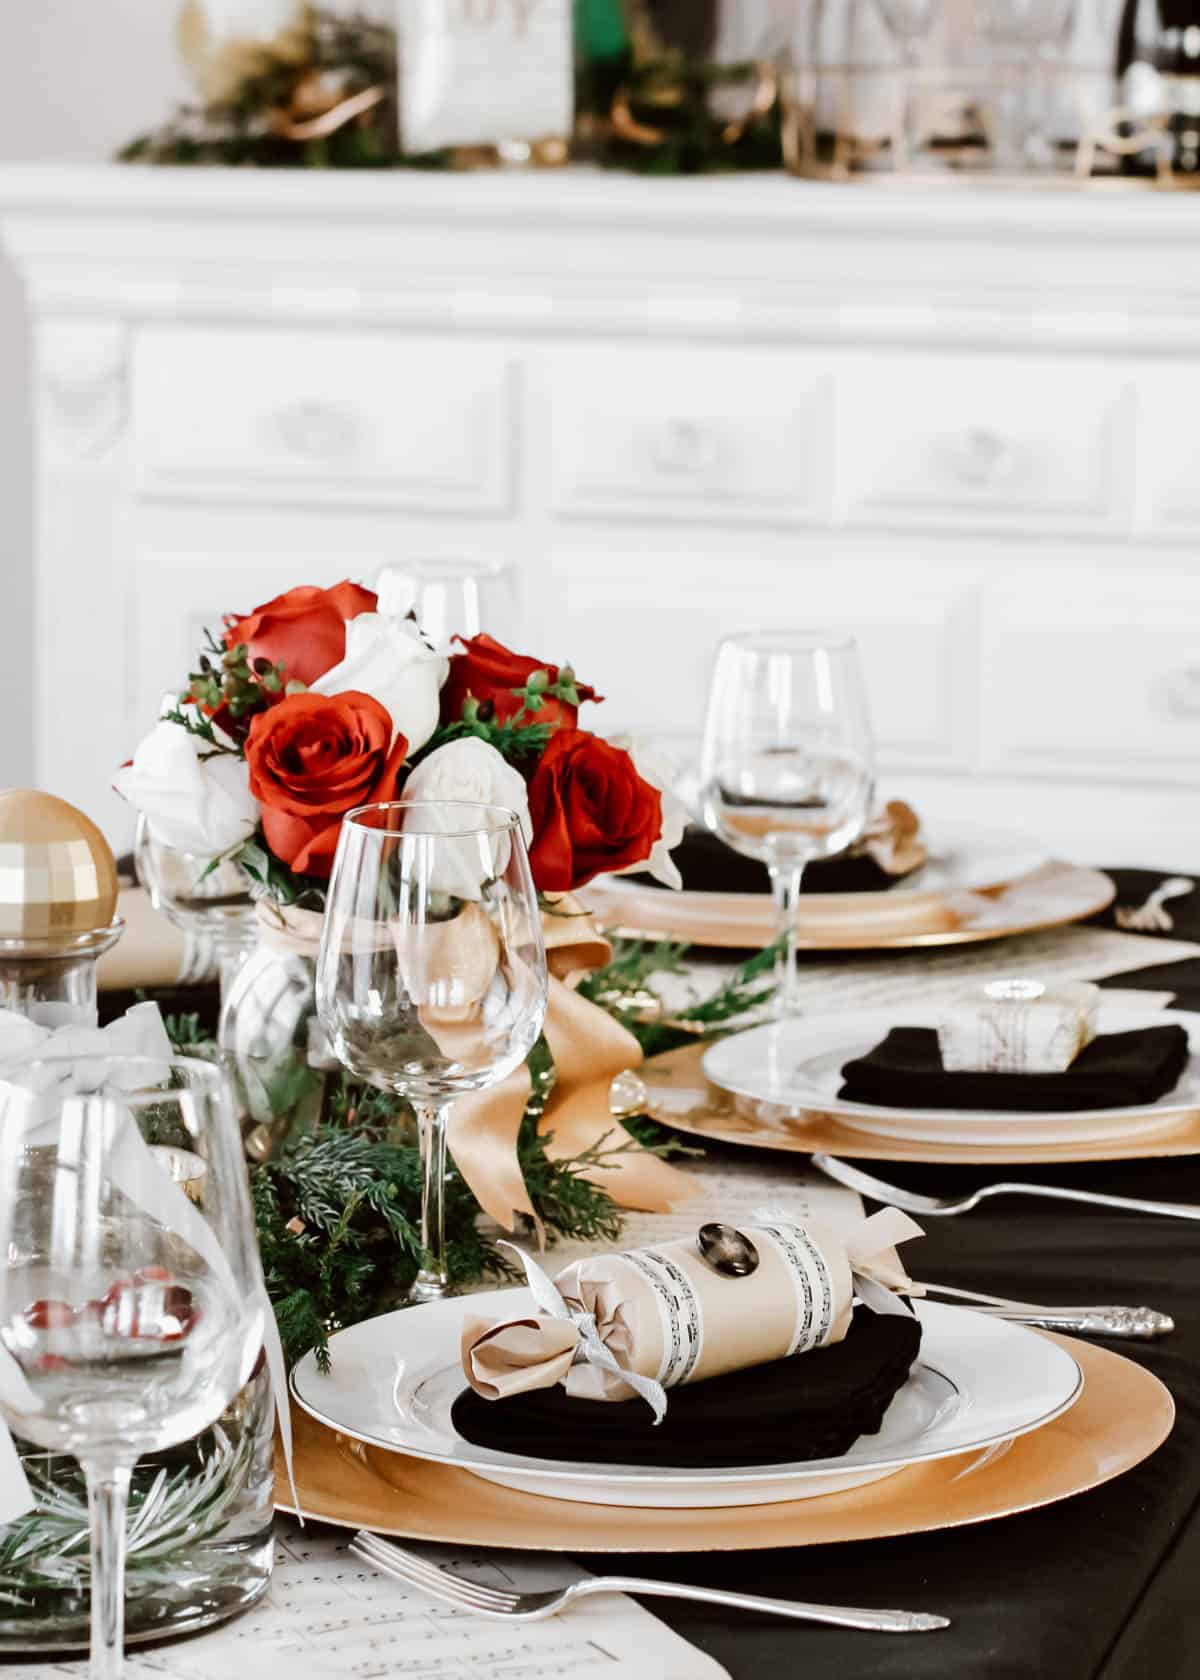 Christmas tablescape with red and white roses centerpiece and sheet music details.